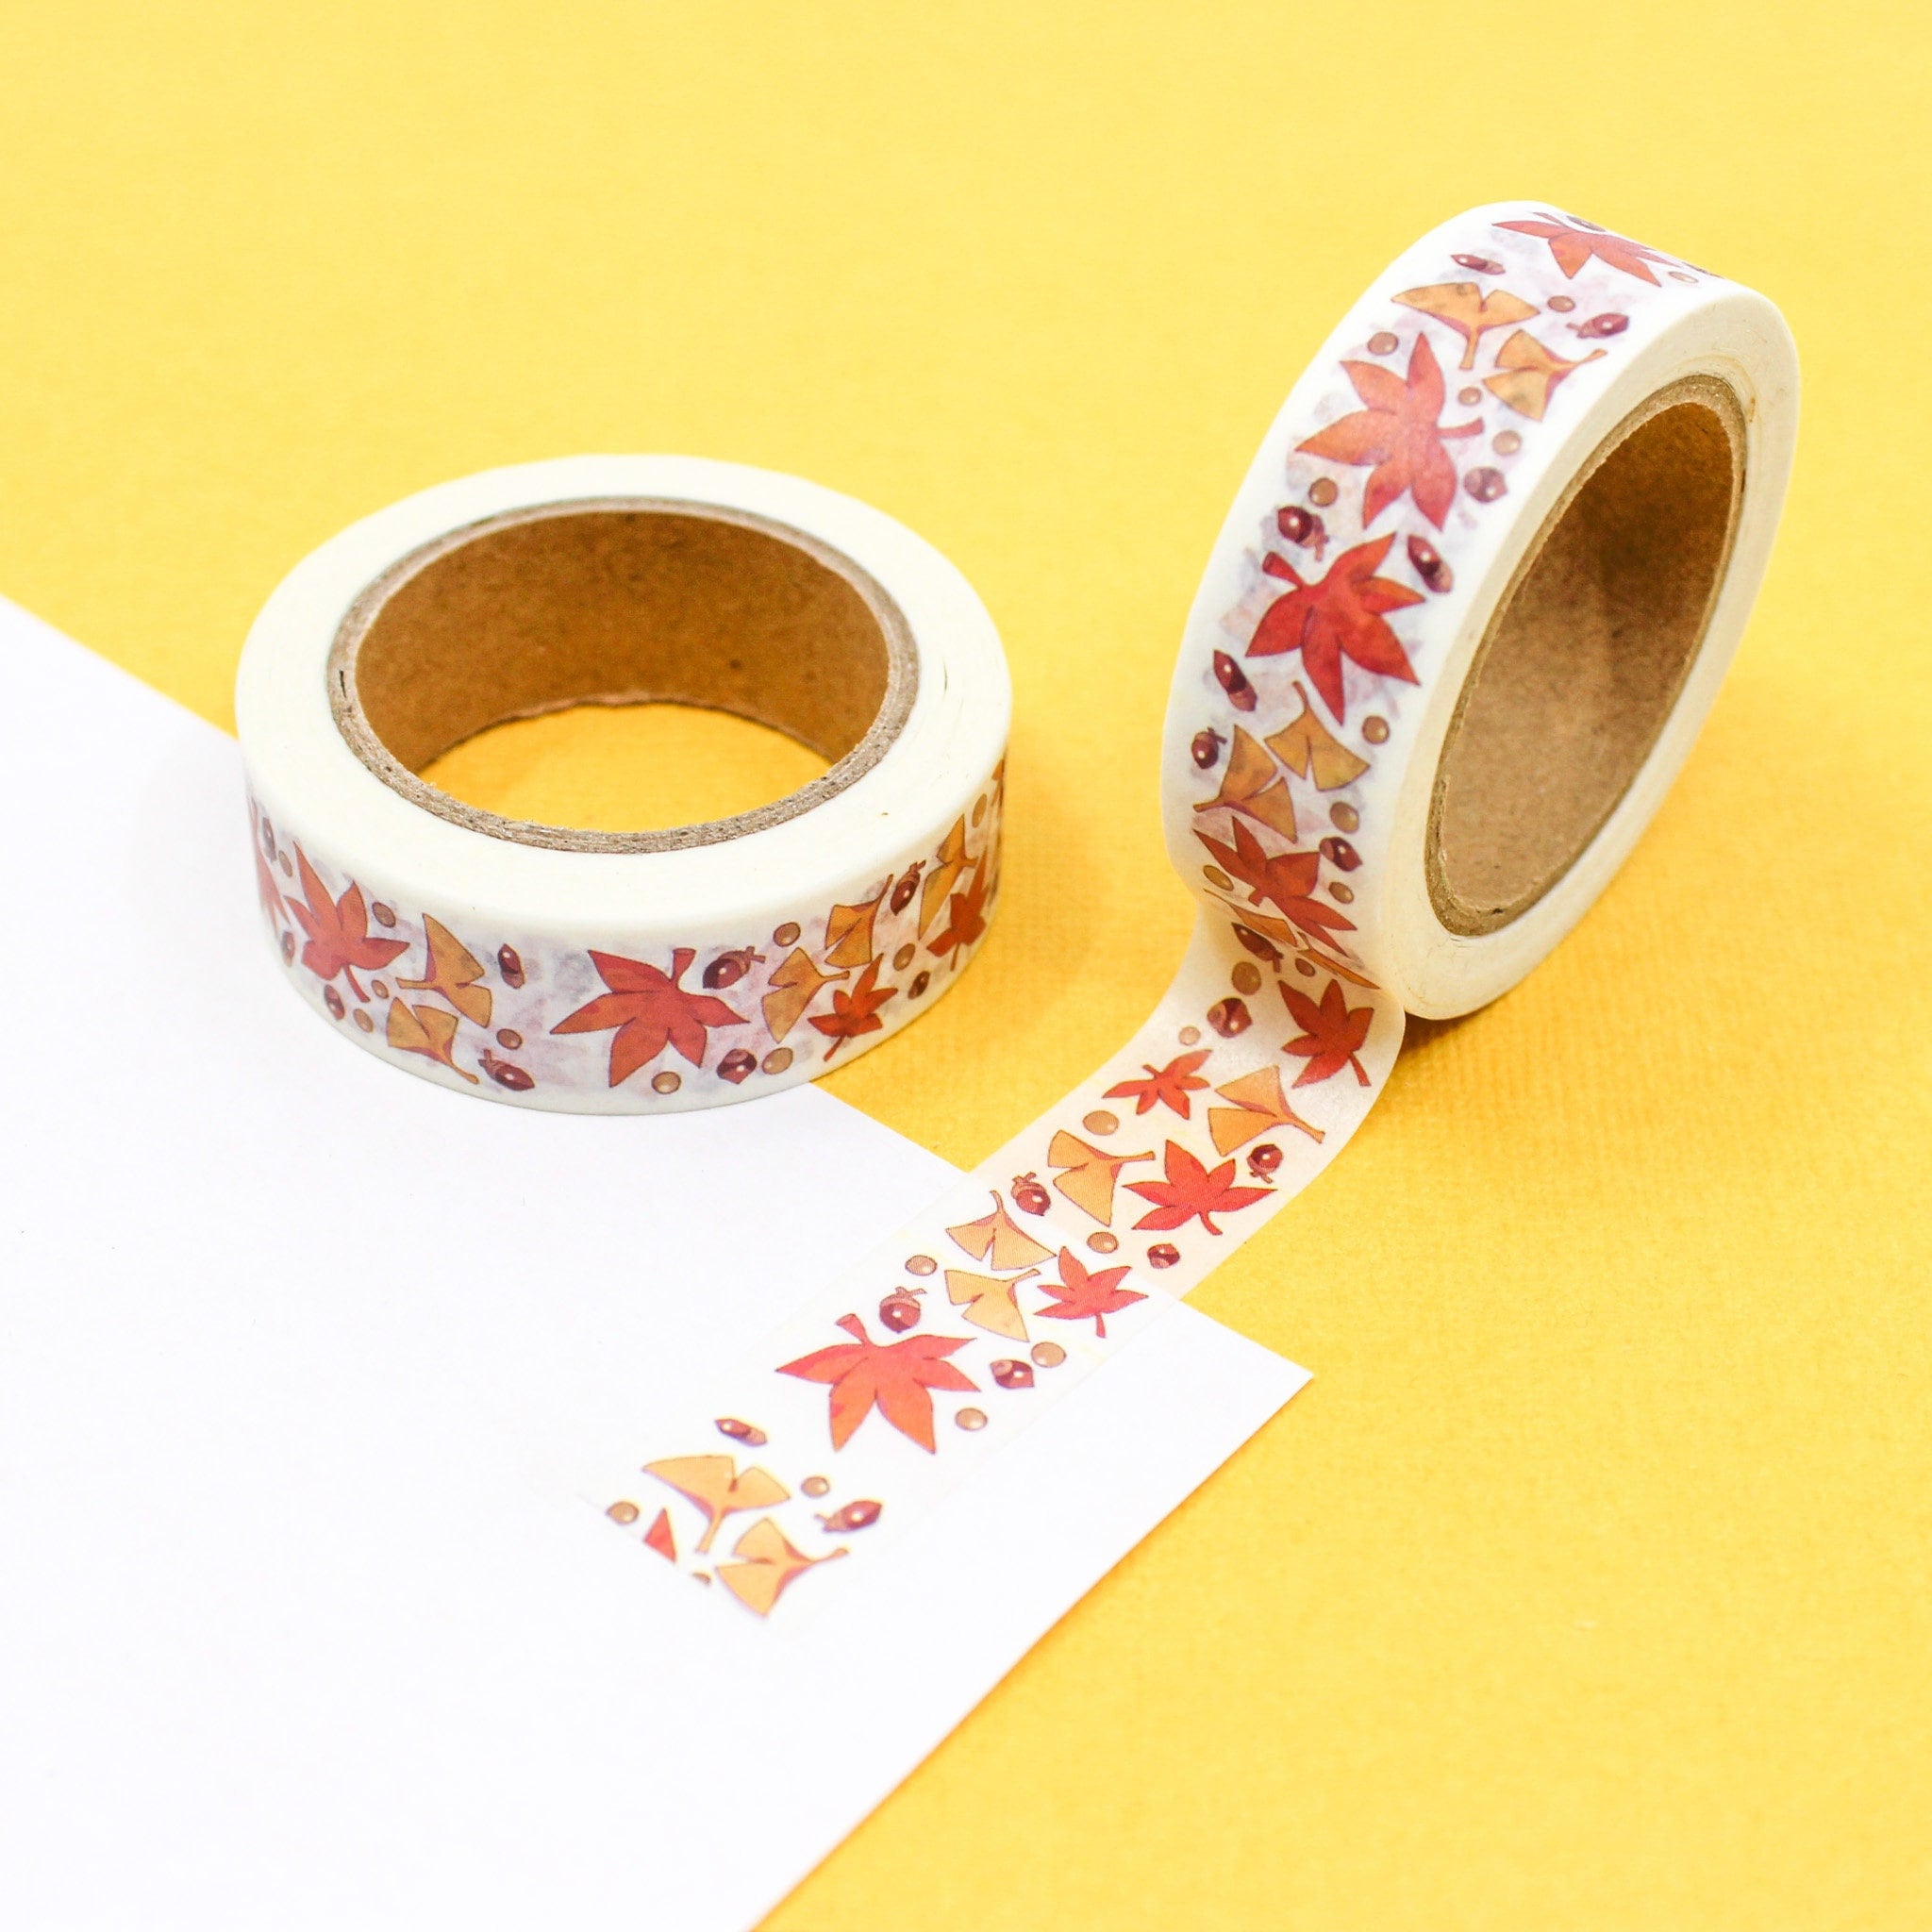 Black and Gold Celestial Moon & Star Pattern Washi Tape, Moon